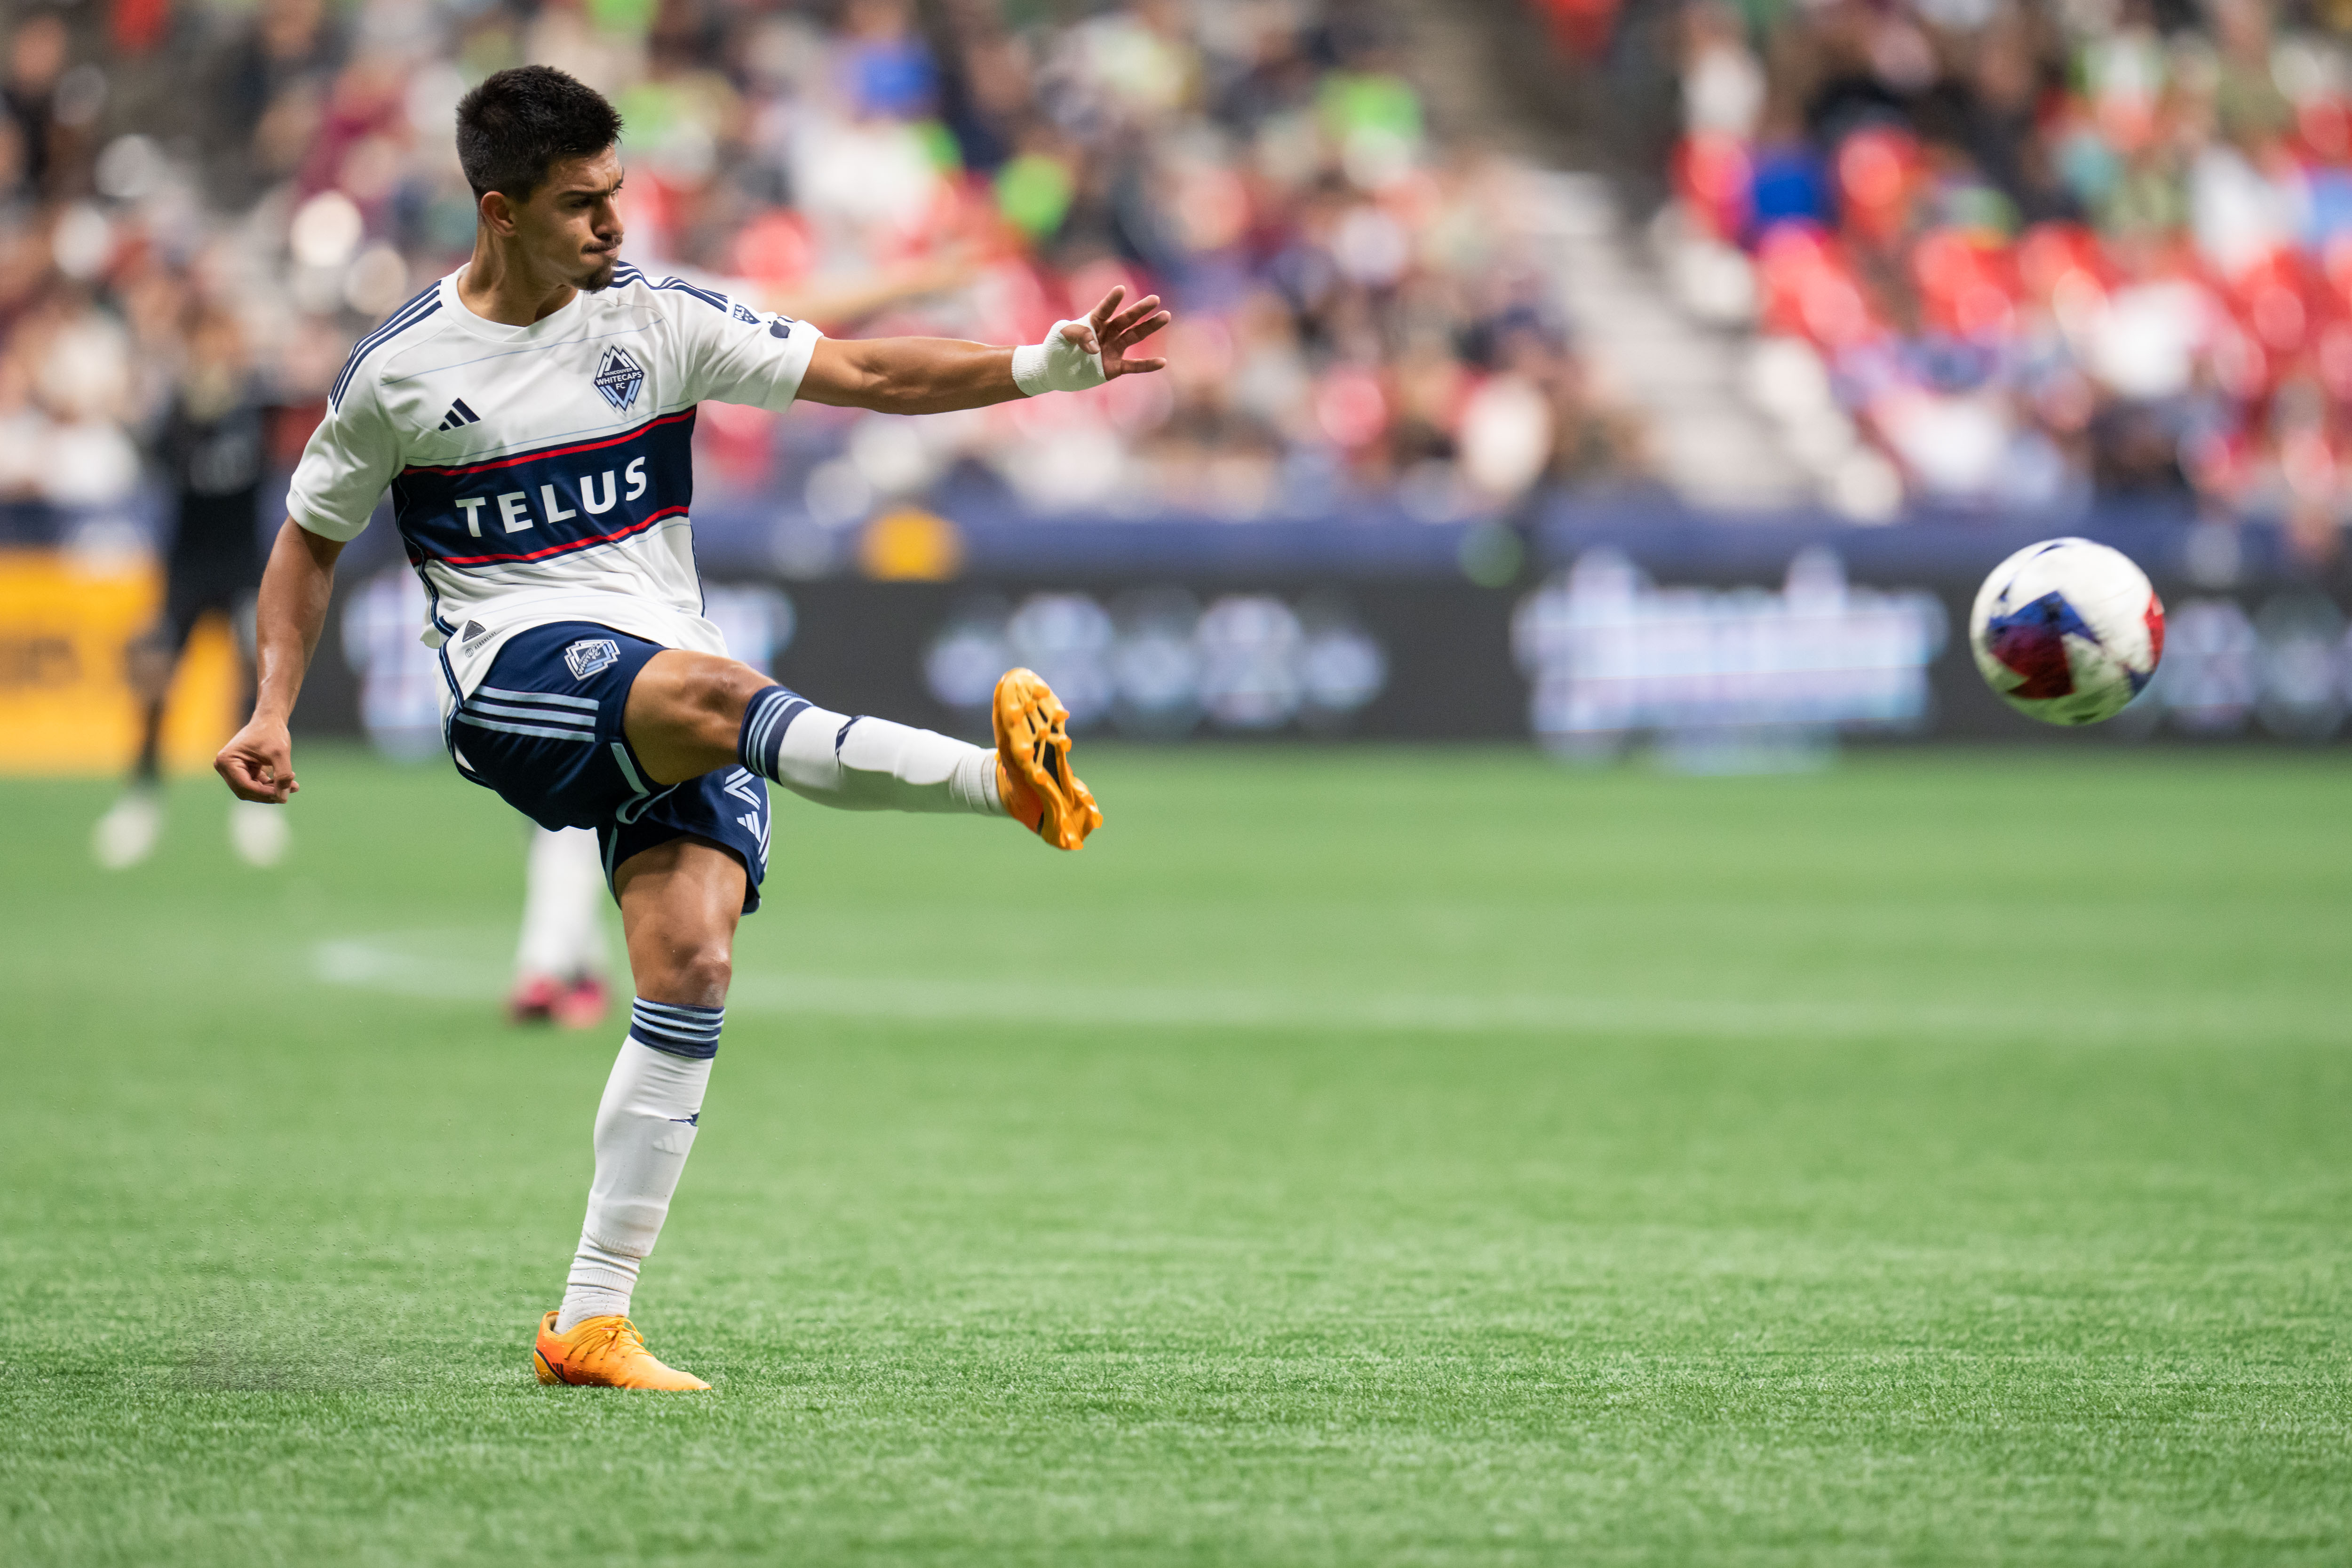 Jeevan Badwal selected to MLS NEXT All-Star Game